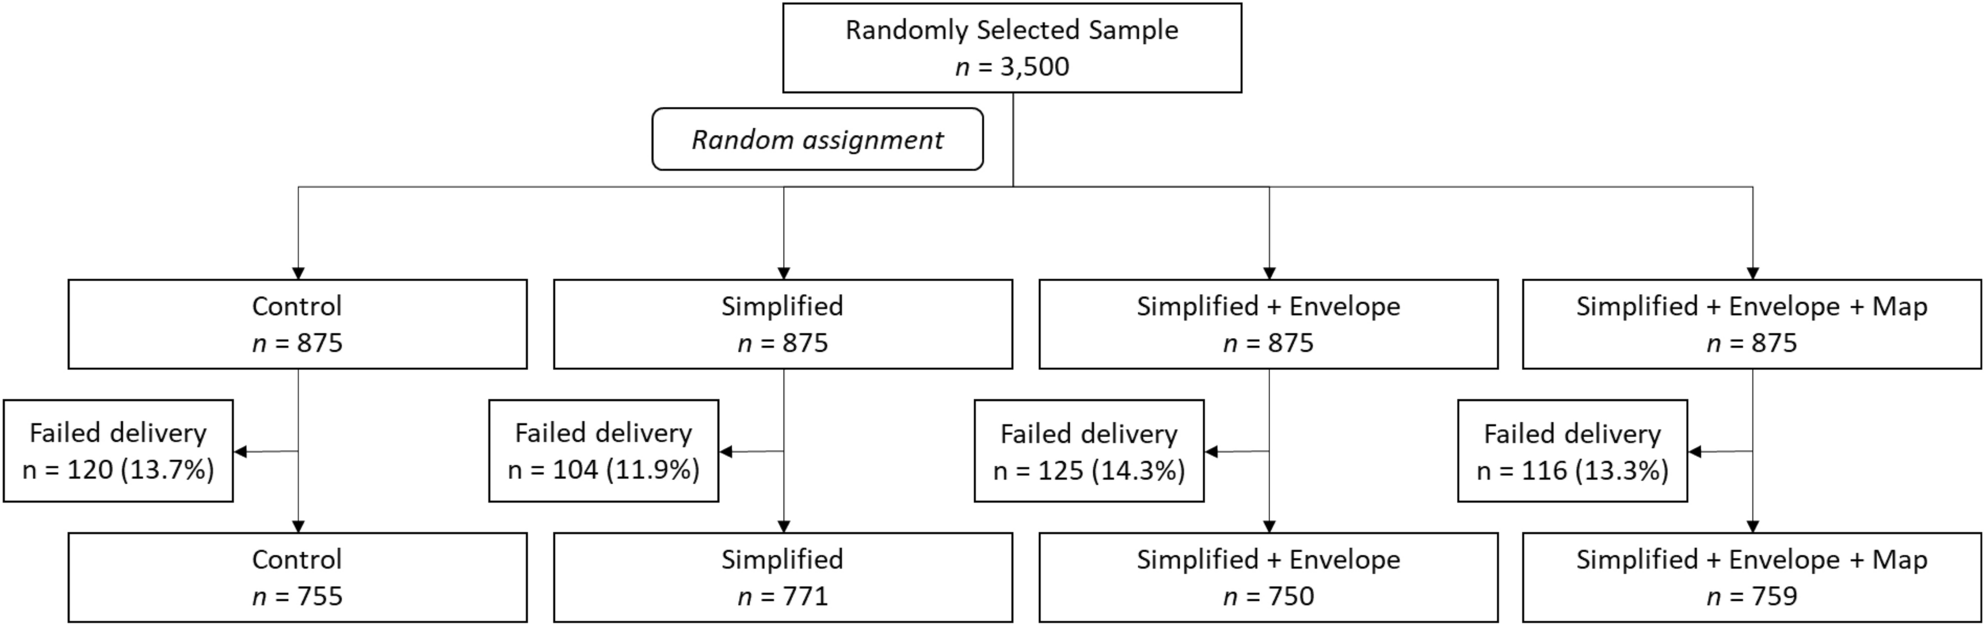 household communications increase uptake of in a randomised controlled trial | Scientific